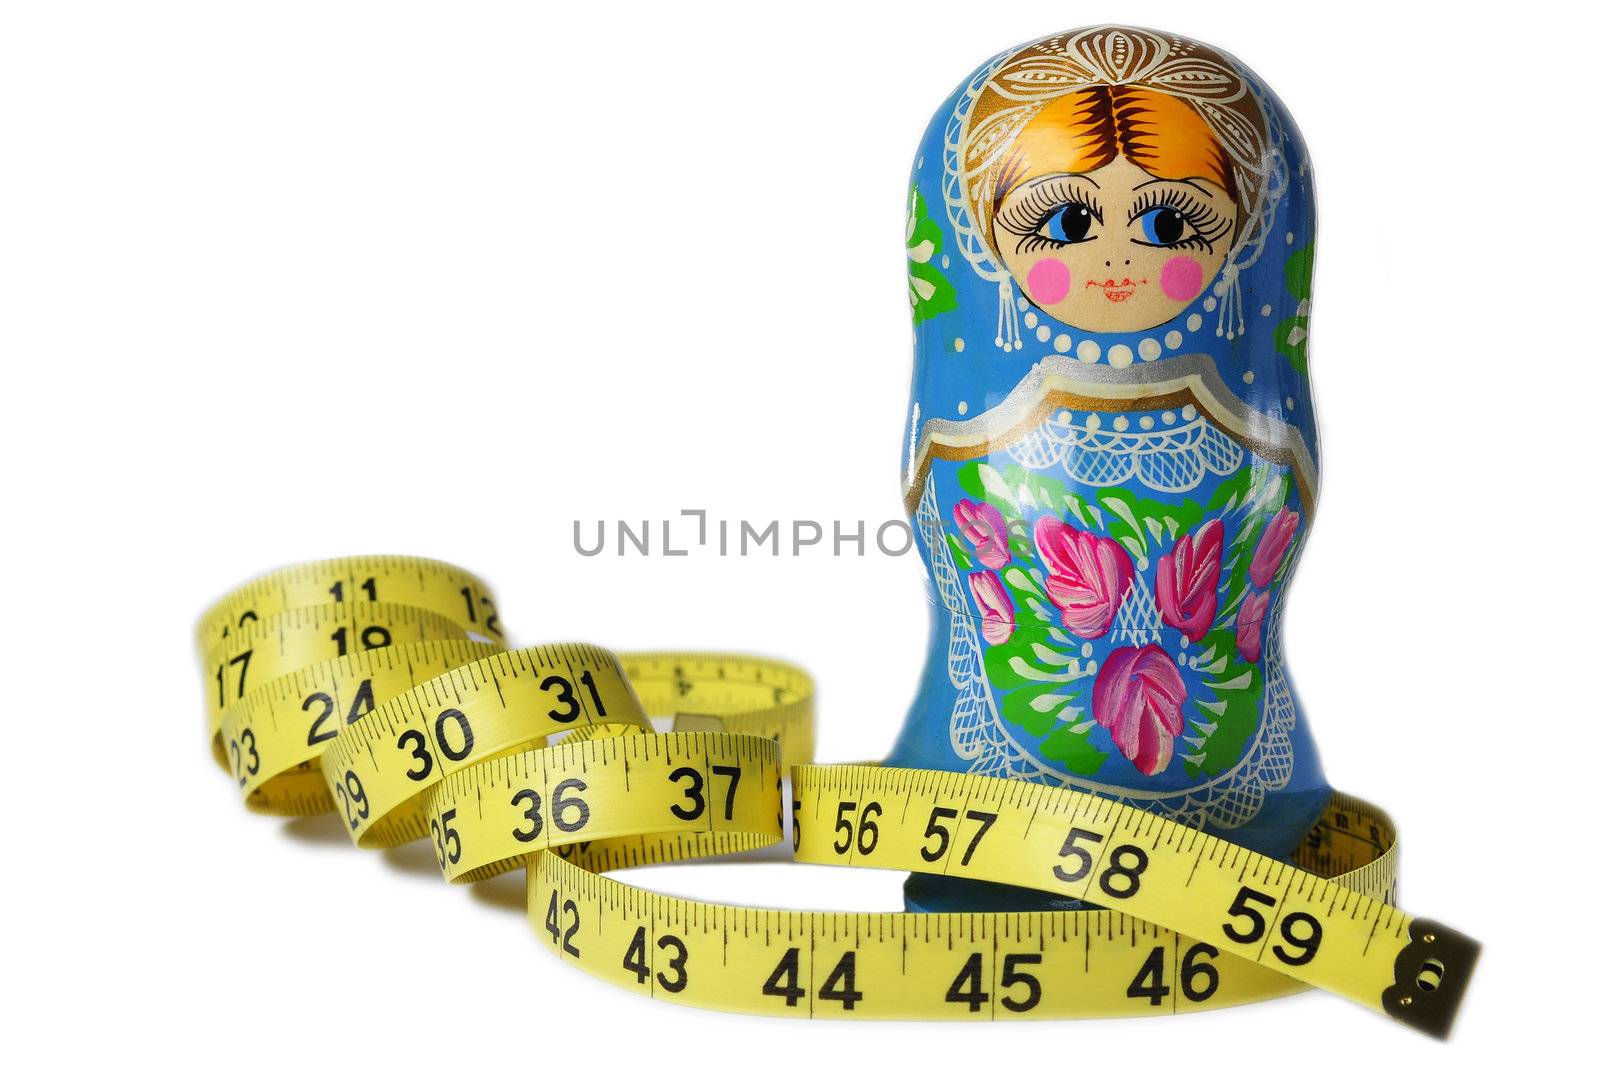 A thin Matrioska doll with a measuring tape around its waist